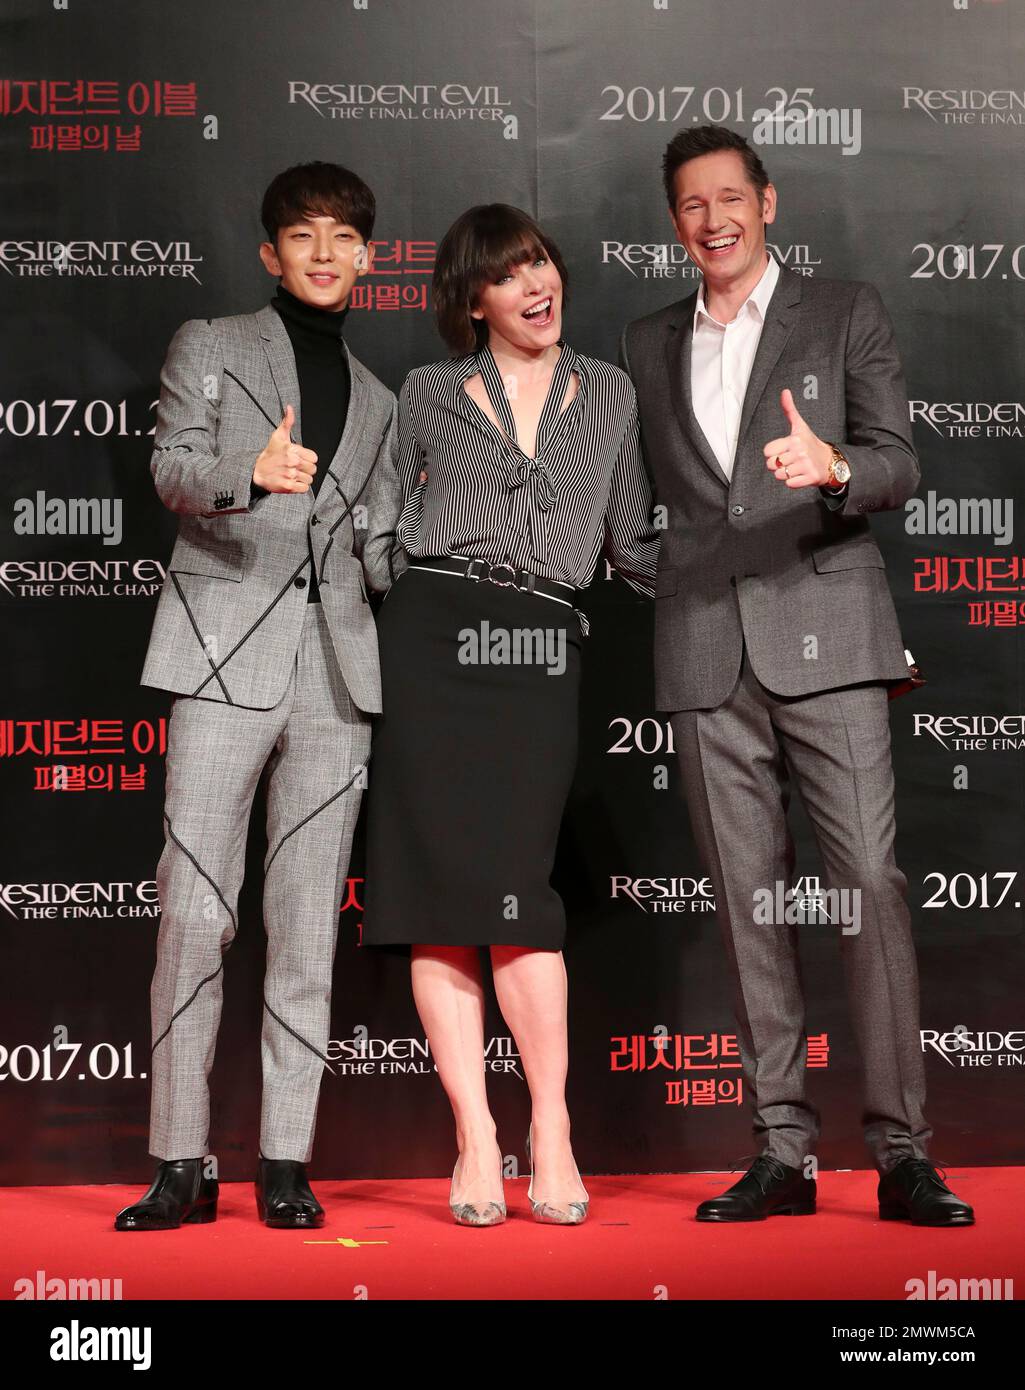 Actors Milla Jovovich and Lee Jun-Ki attend the Seoul premiere for News  Photo - Getty Images